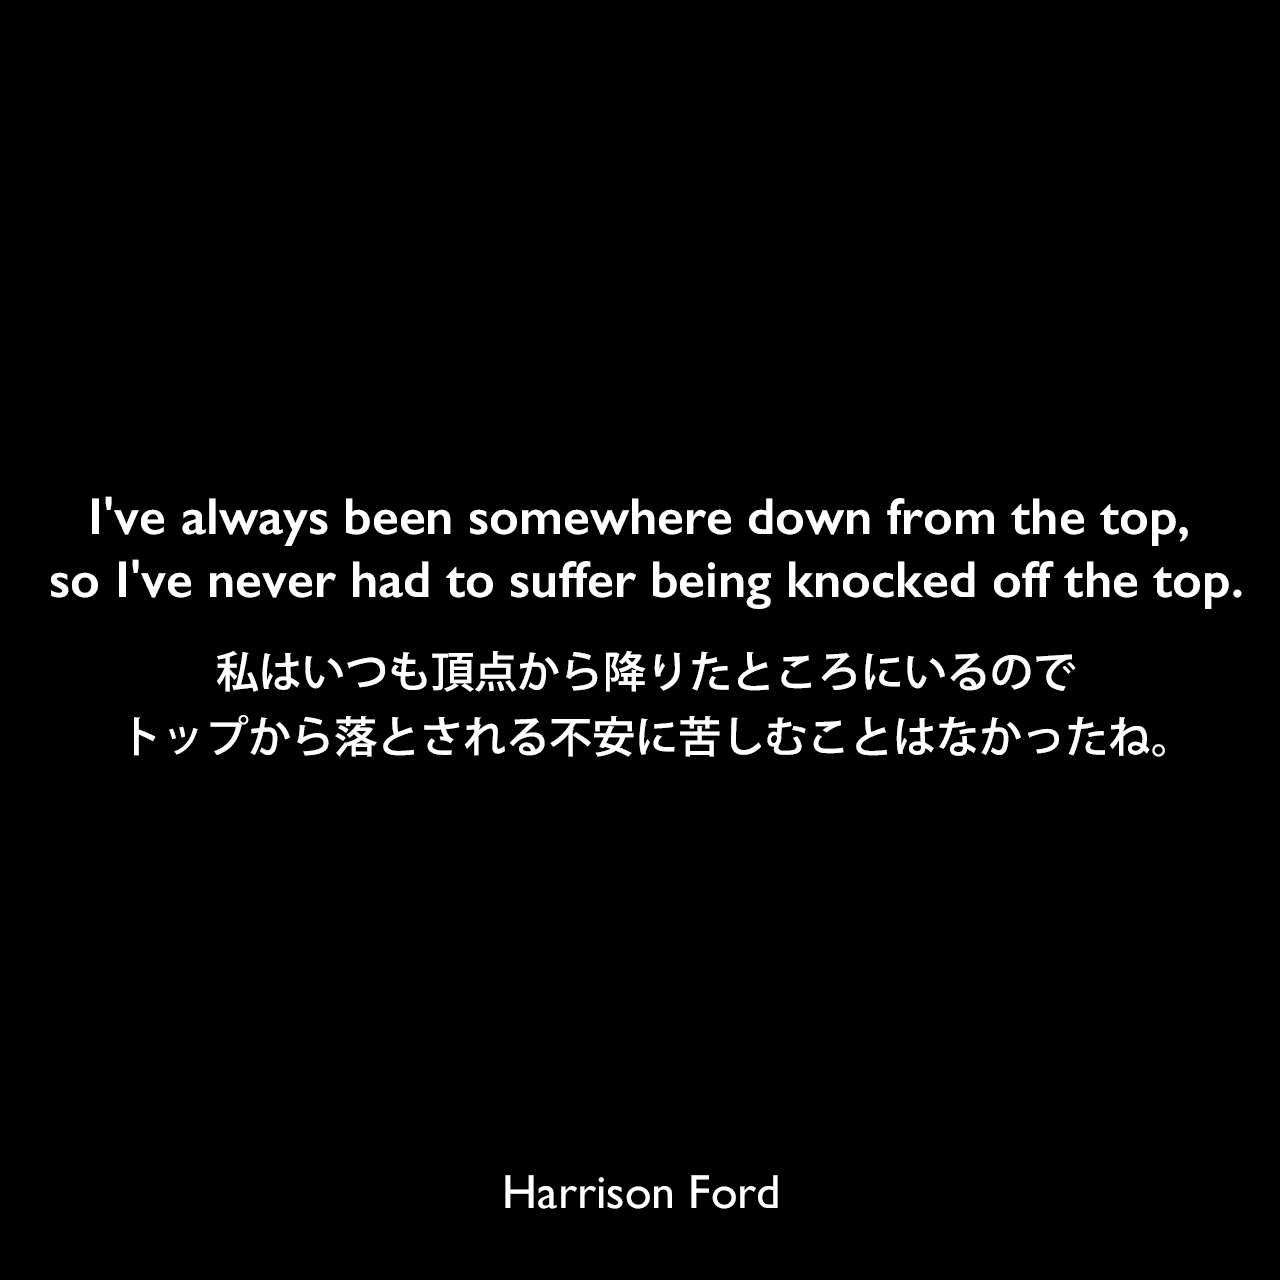 I've always been somewhere down from the top, so I've never had to suffer being knocked off the top.私はいつも頂点から降りたところにいるので、トップから落とされる不安に苦しむことはなかったね。Harrison Ford